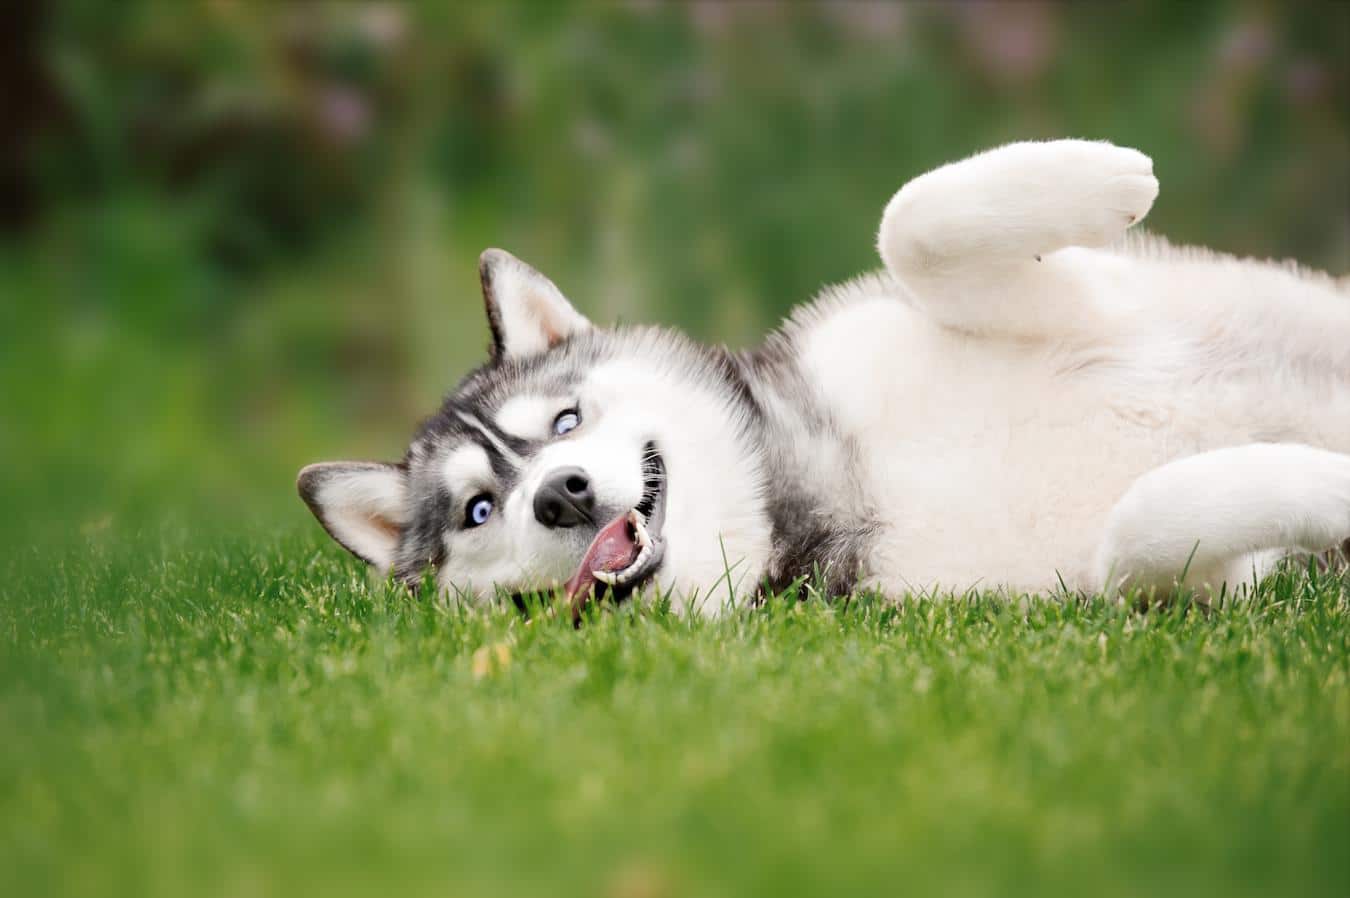 siberian husky dog rolling in the grass quiz quiz quiz dog breed dog breed popular dog breeds pet peeves more quizzes love dogs describe